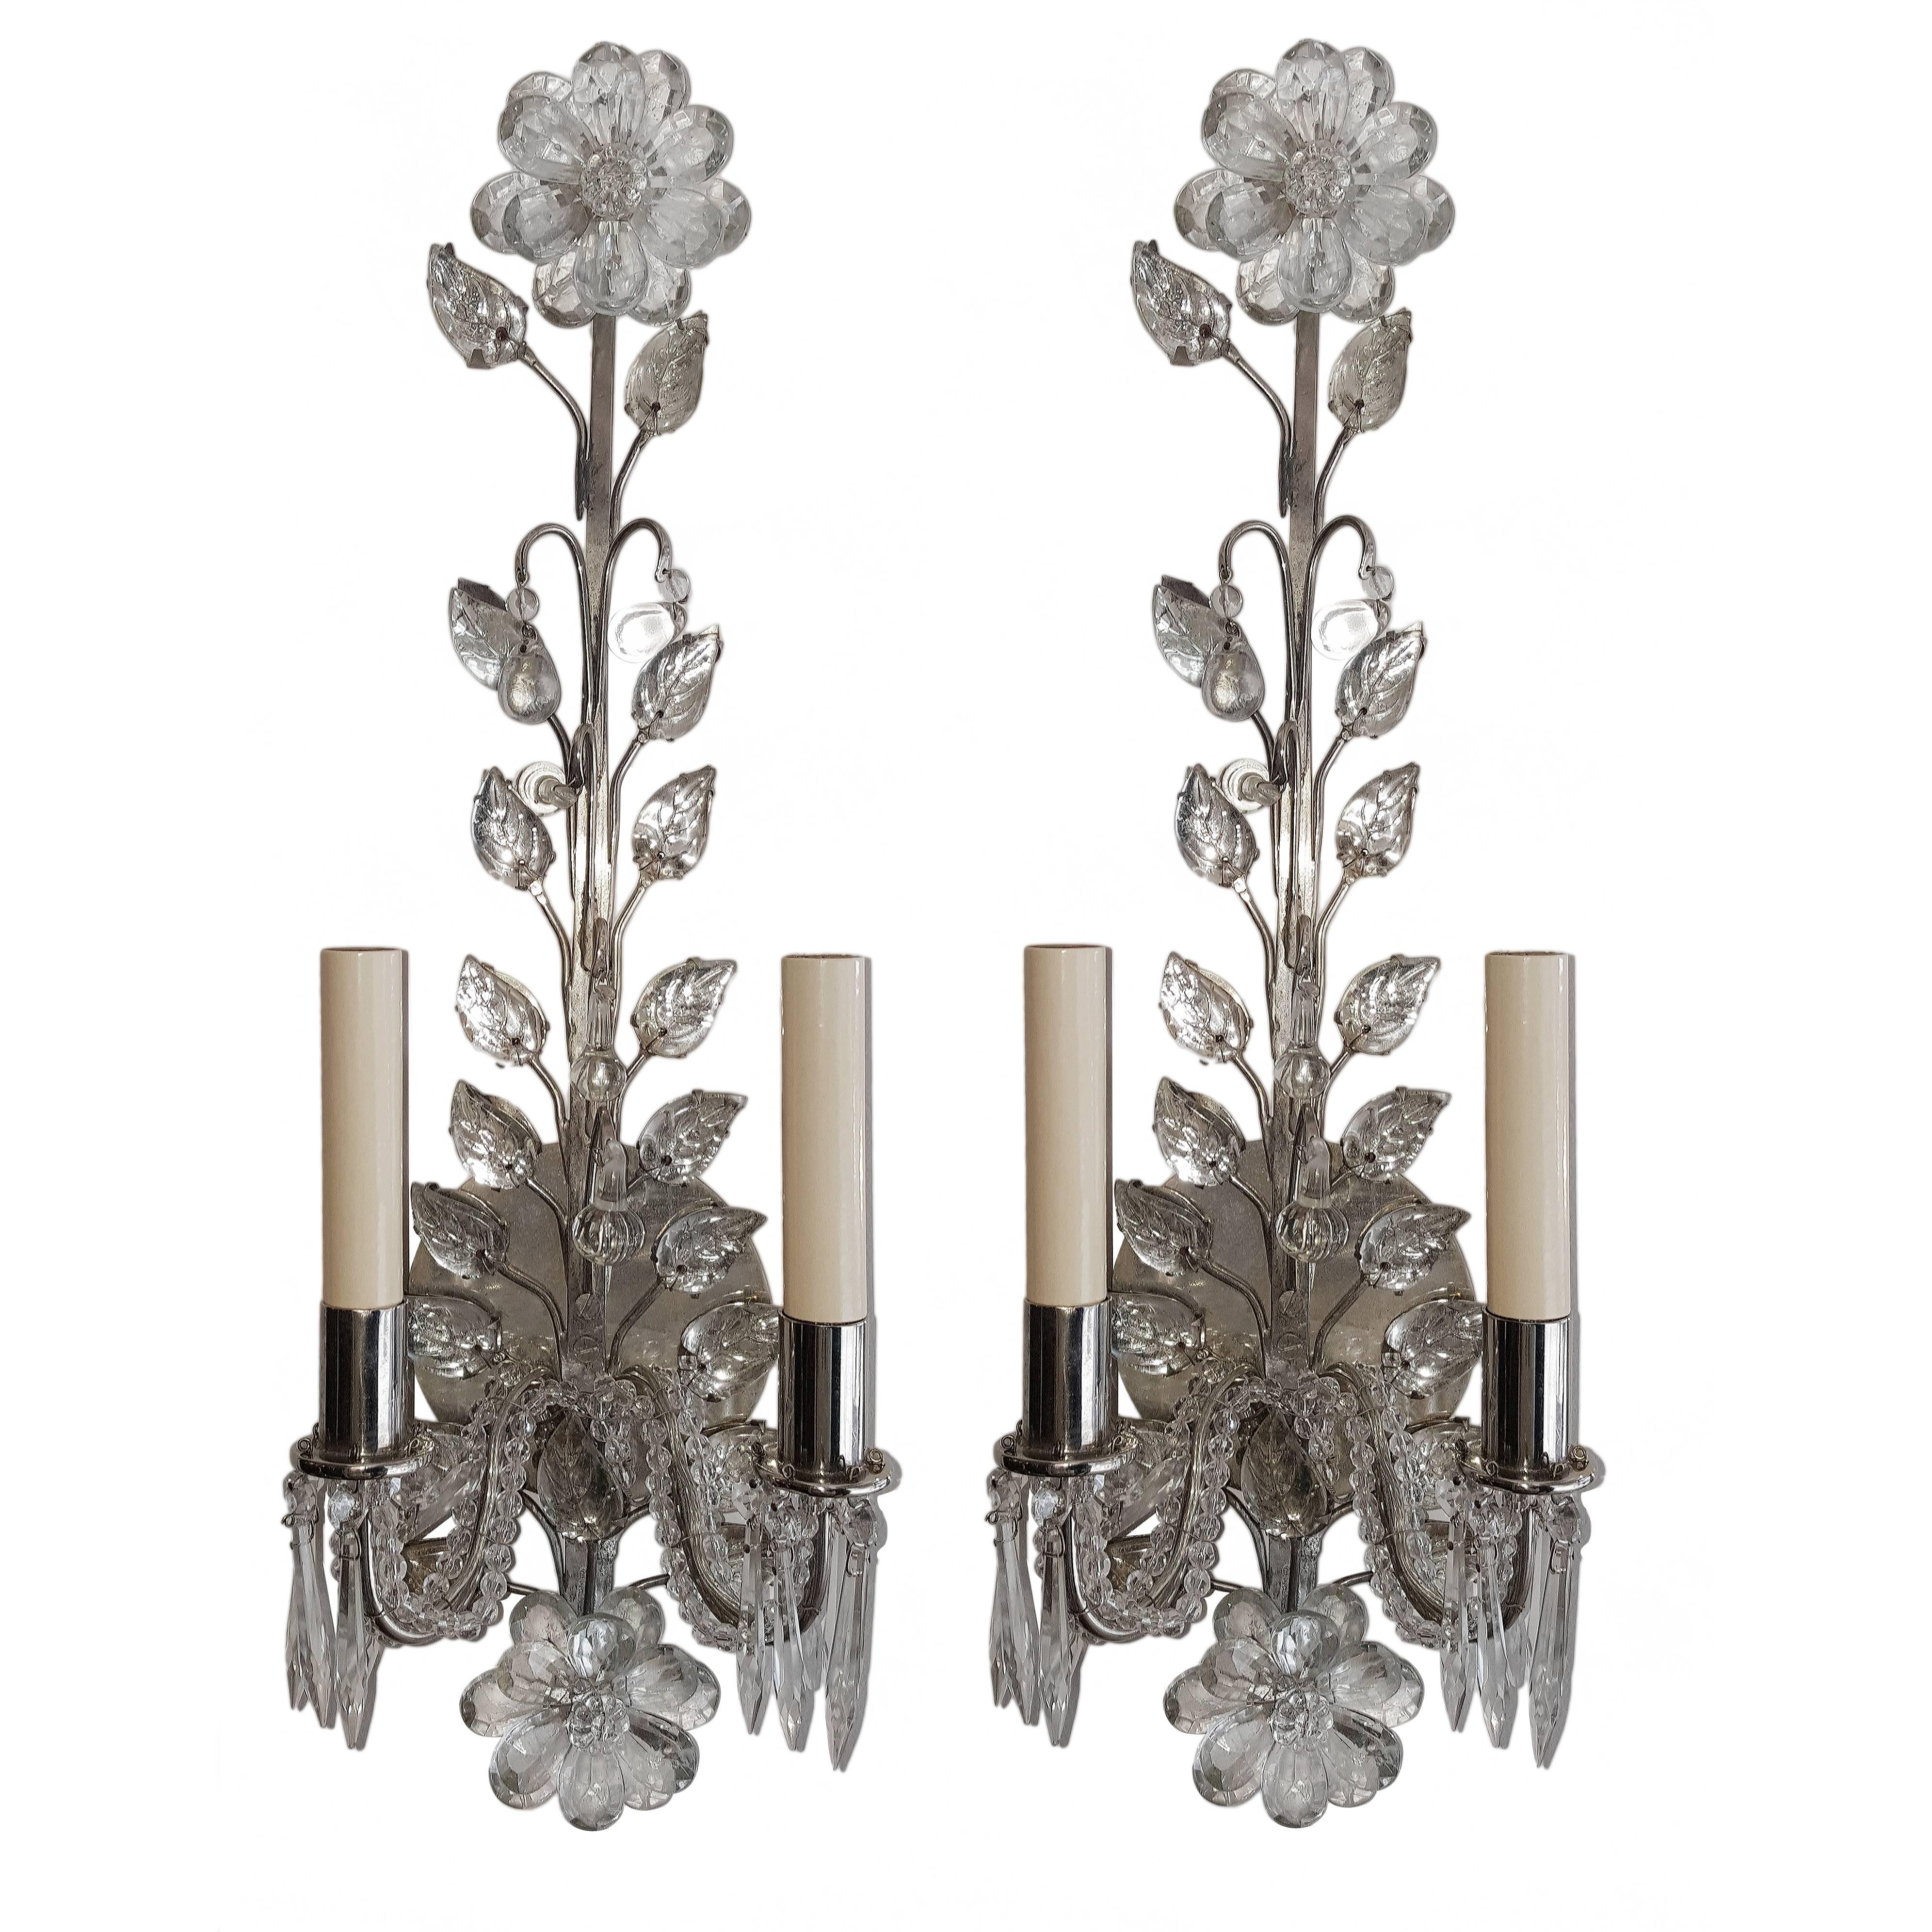 Pair of Silver Plated Sconces with Molded Leaves